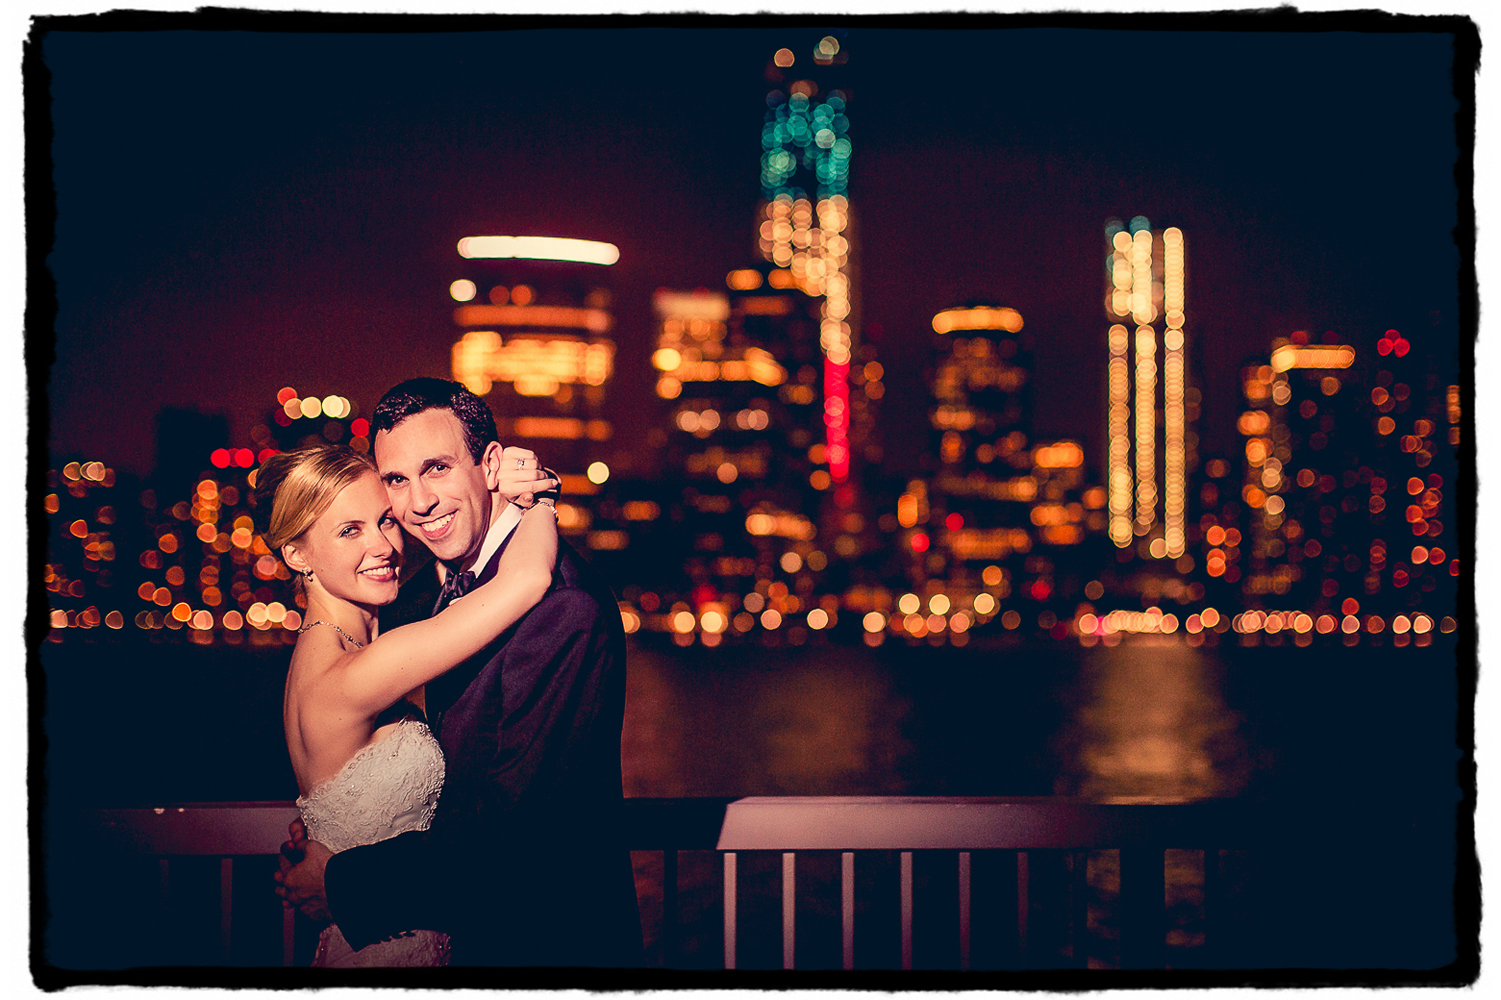 Towards the end of the night I asked Gena and Josh if they'd step outside with me for a picture with the amazing NYC skyline behind them here at the Hyatt in Jersey City.